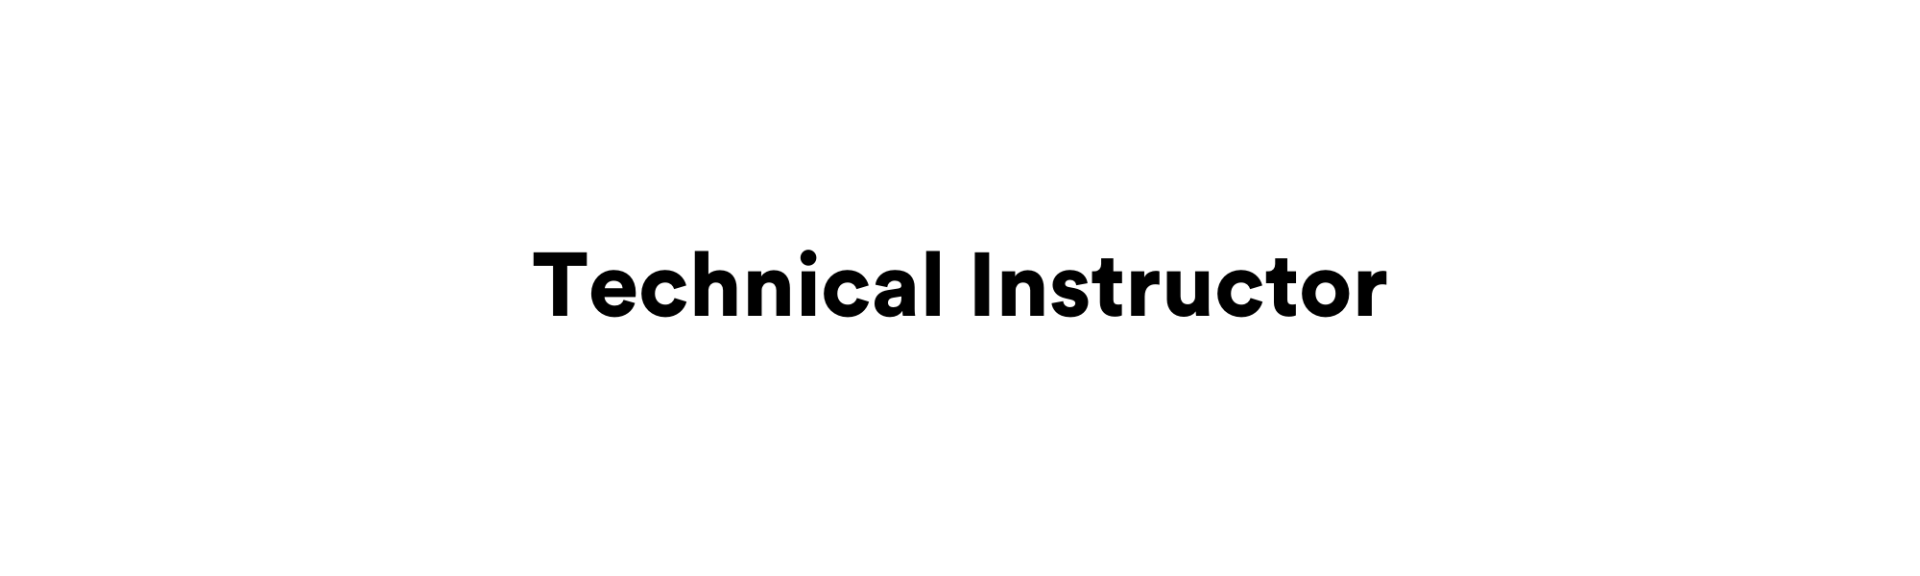 Technical Instructor